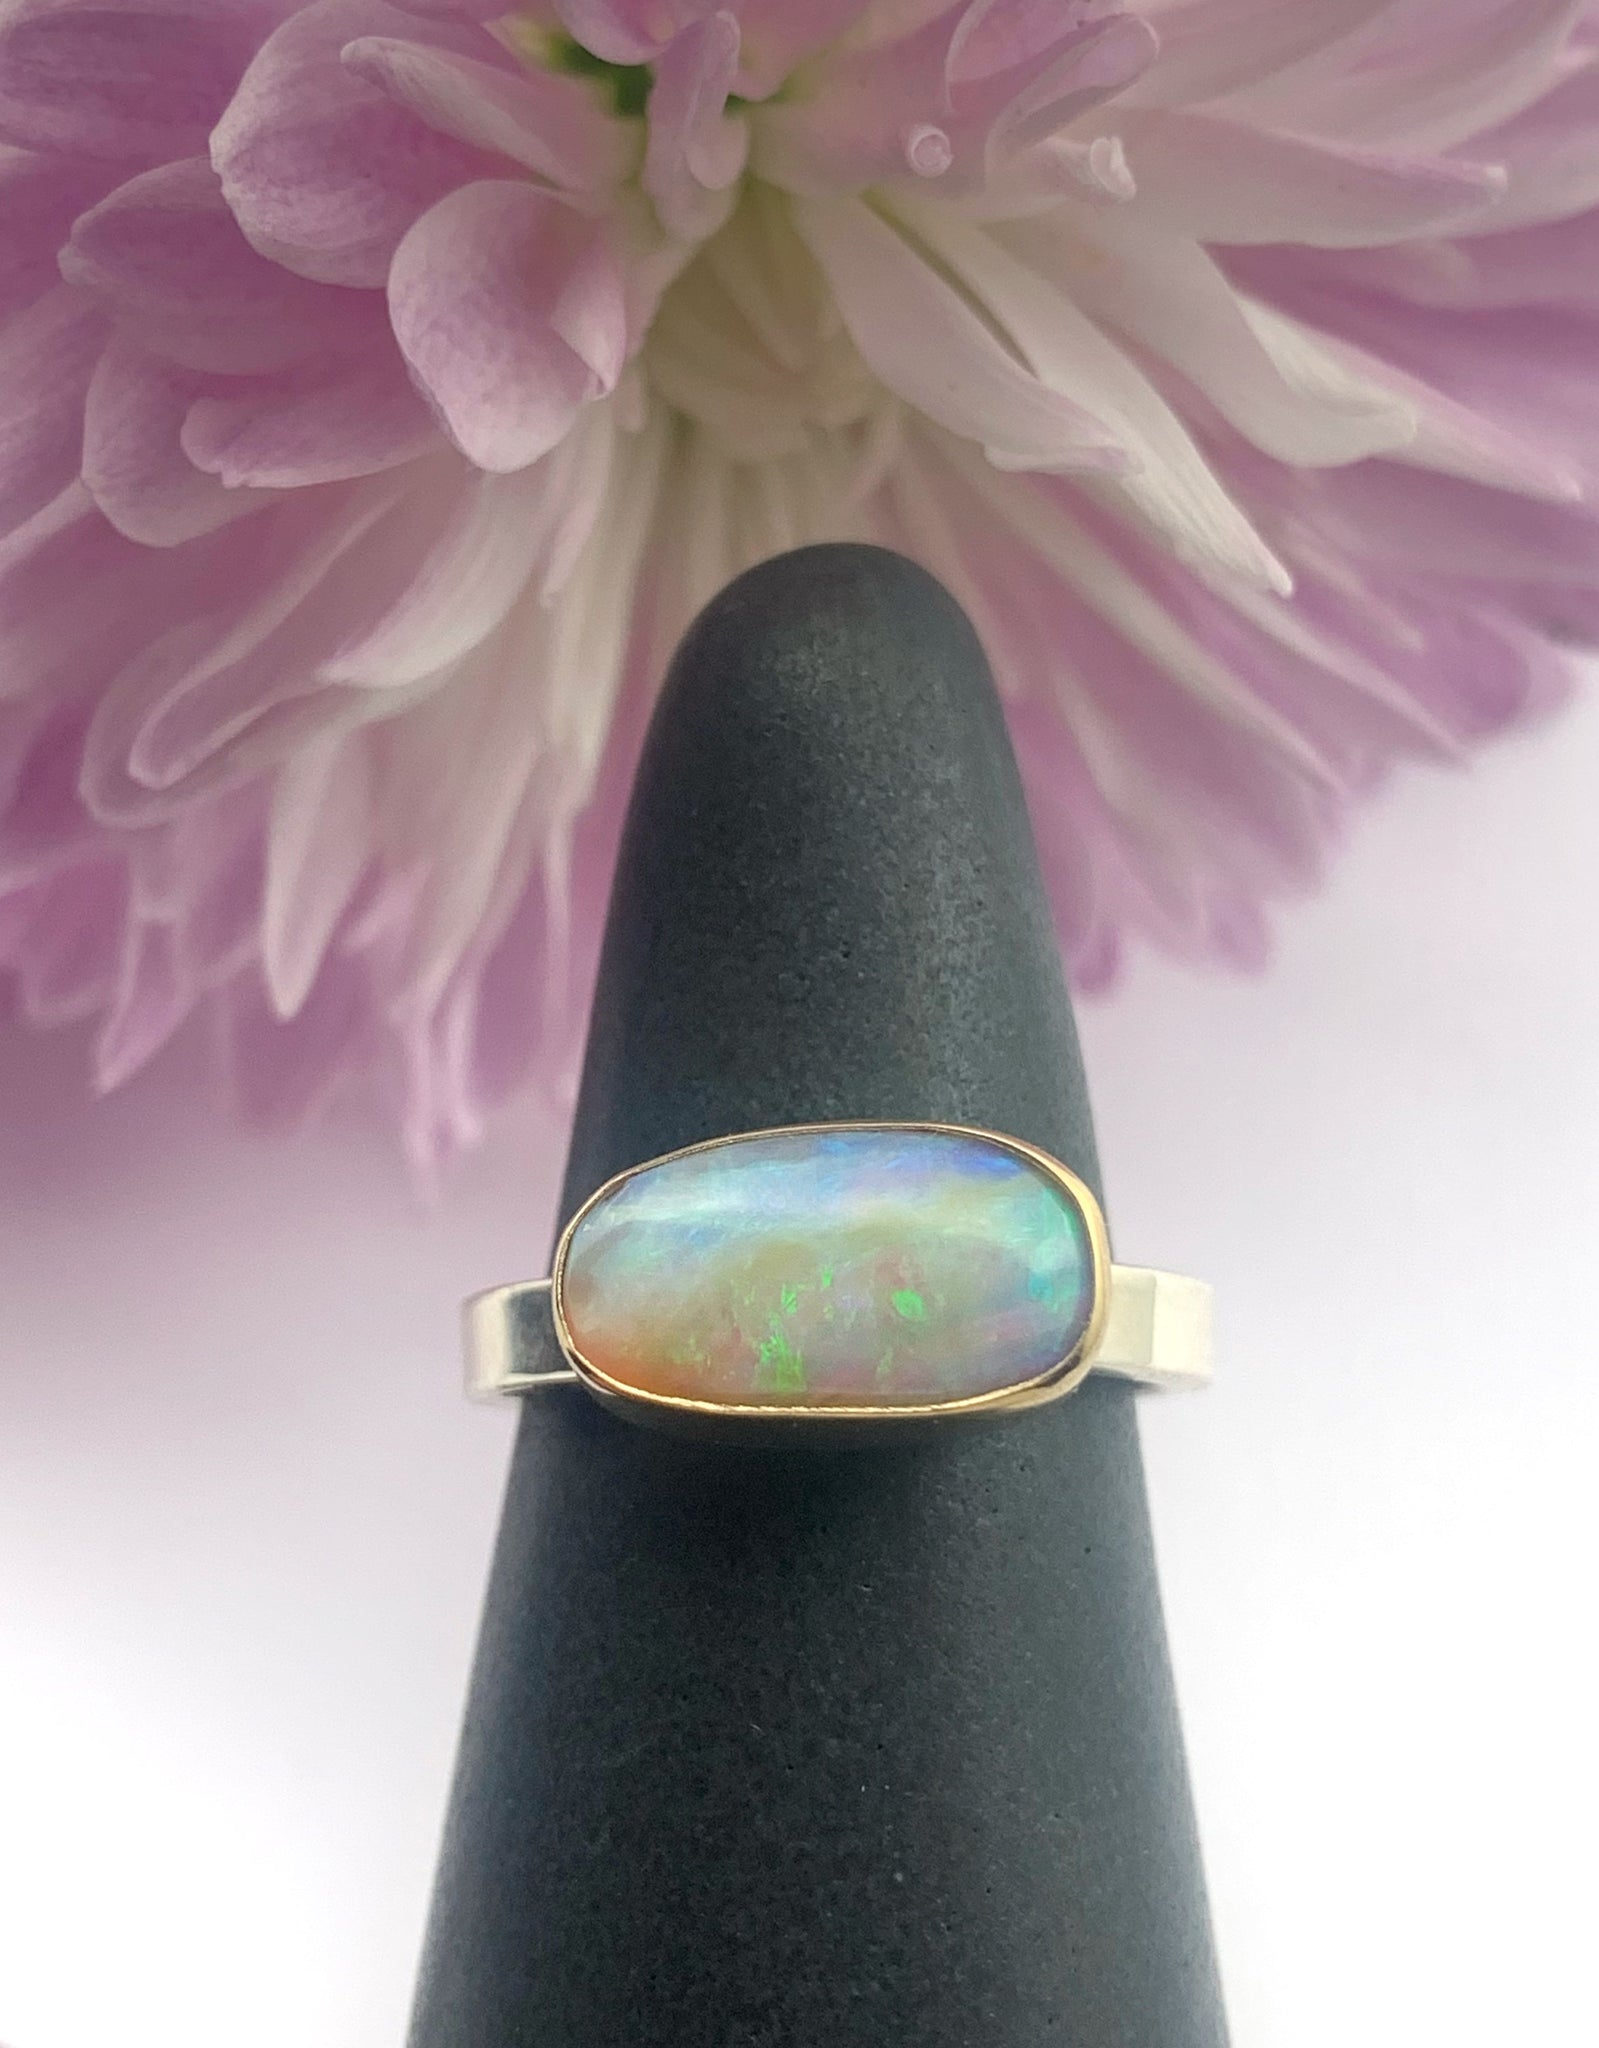 Australian Opal Ring with 14k bezels and Sterling Silver Band,Crystal Opal Ring,Solid Opal Ring in Gold and Silver, OOAK Opal Statement Ring